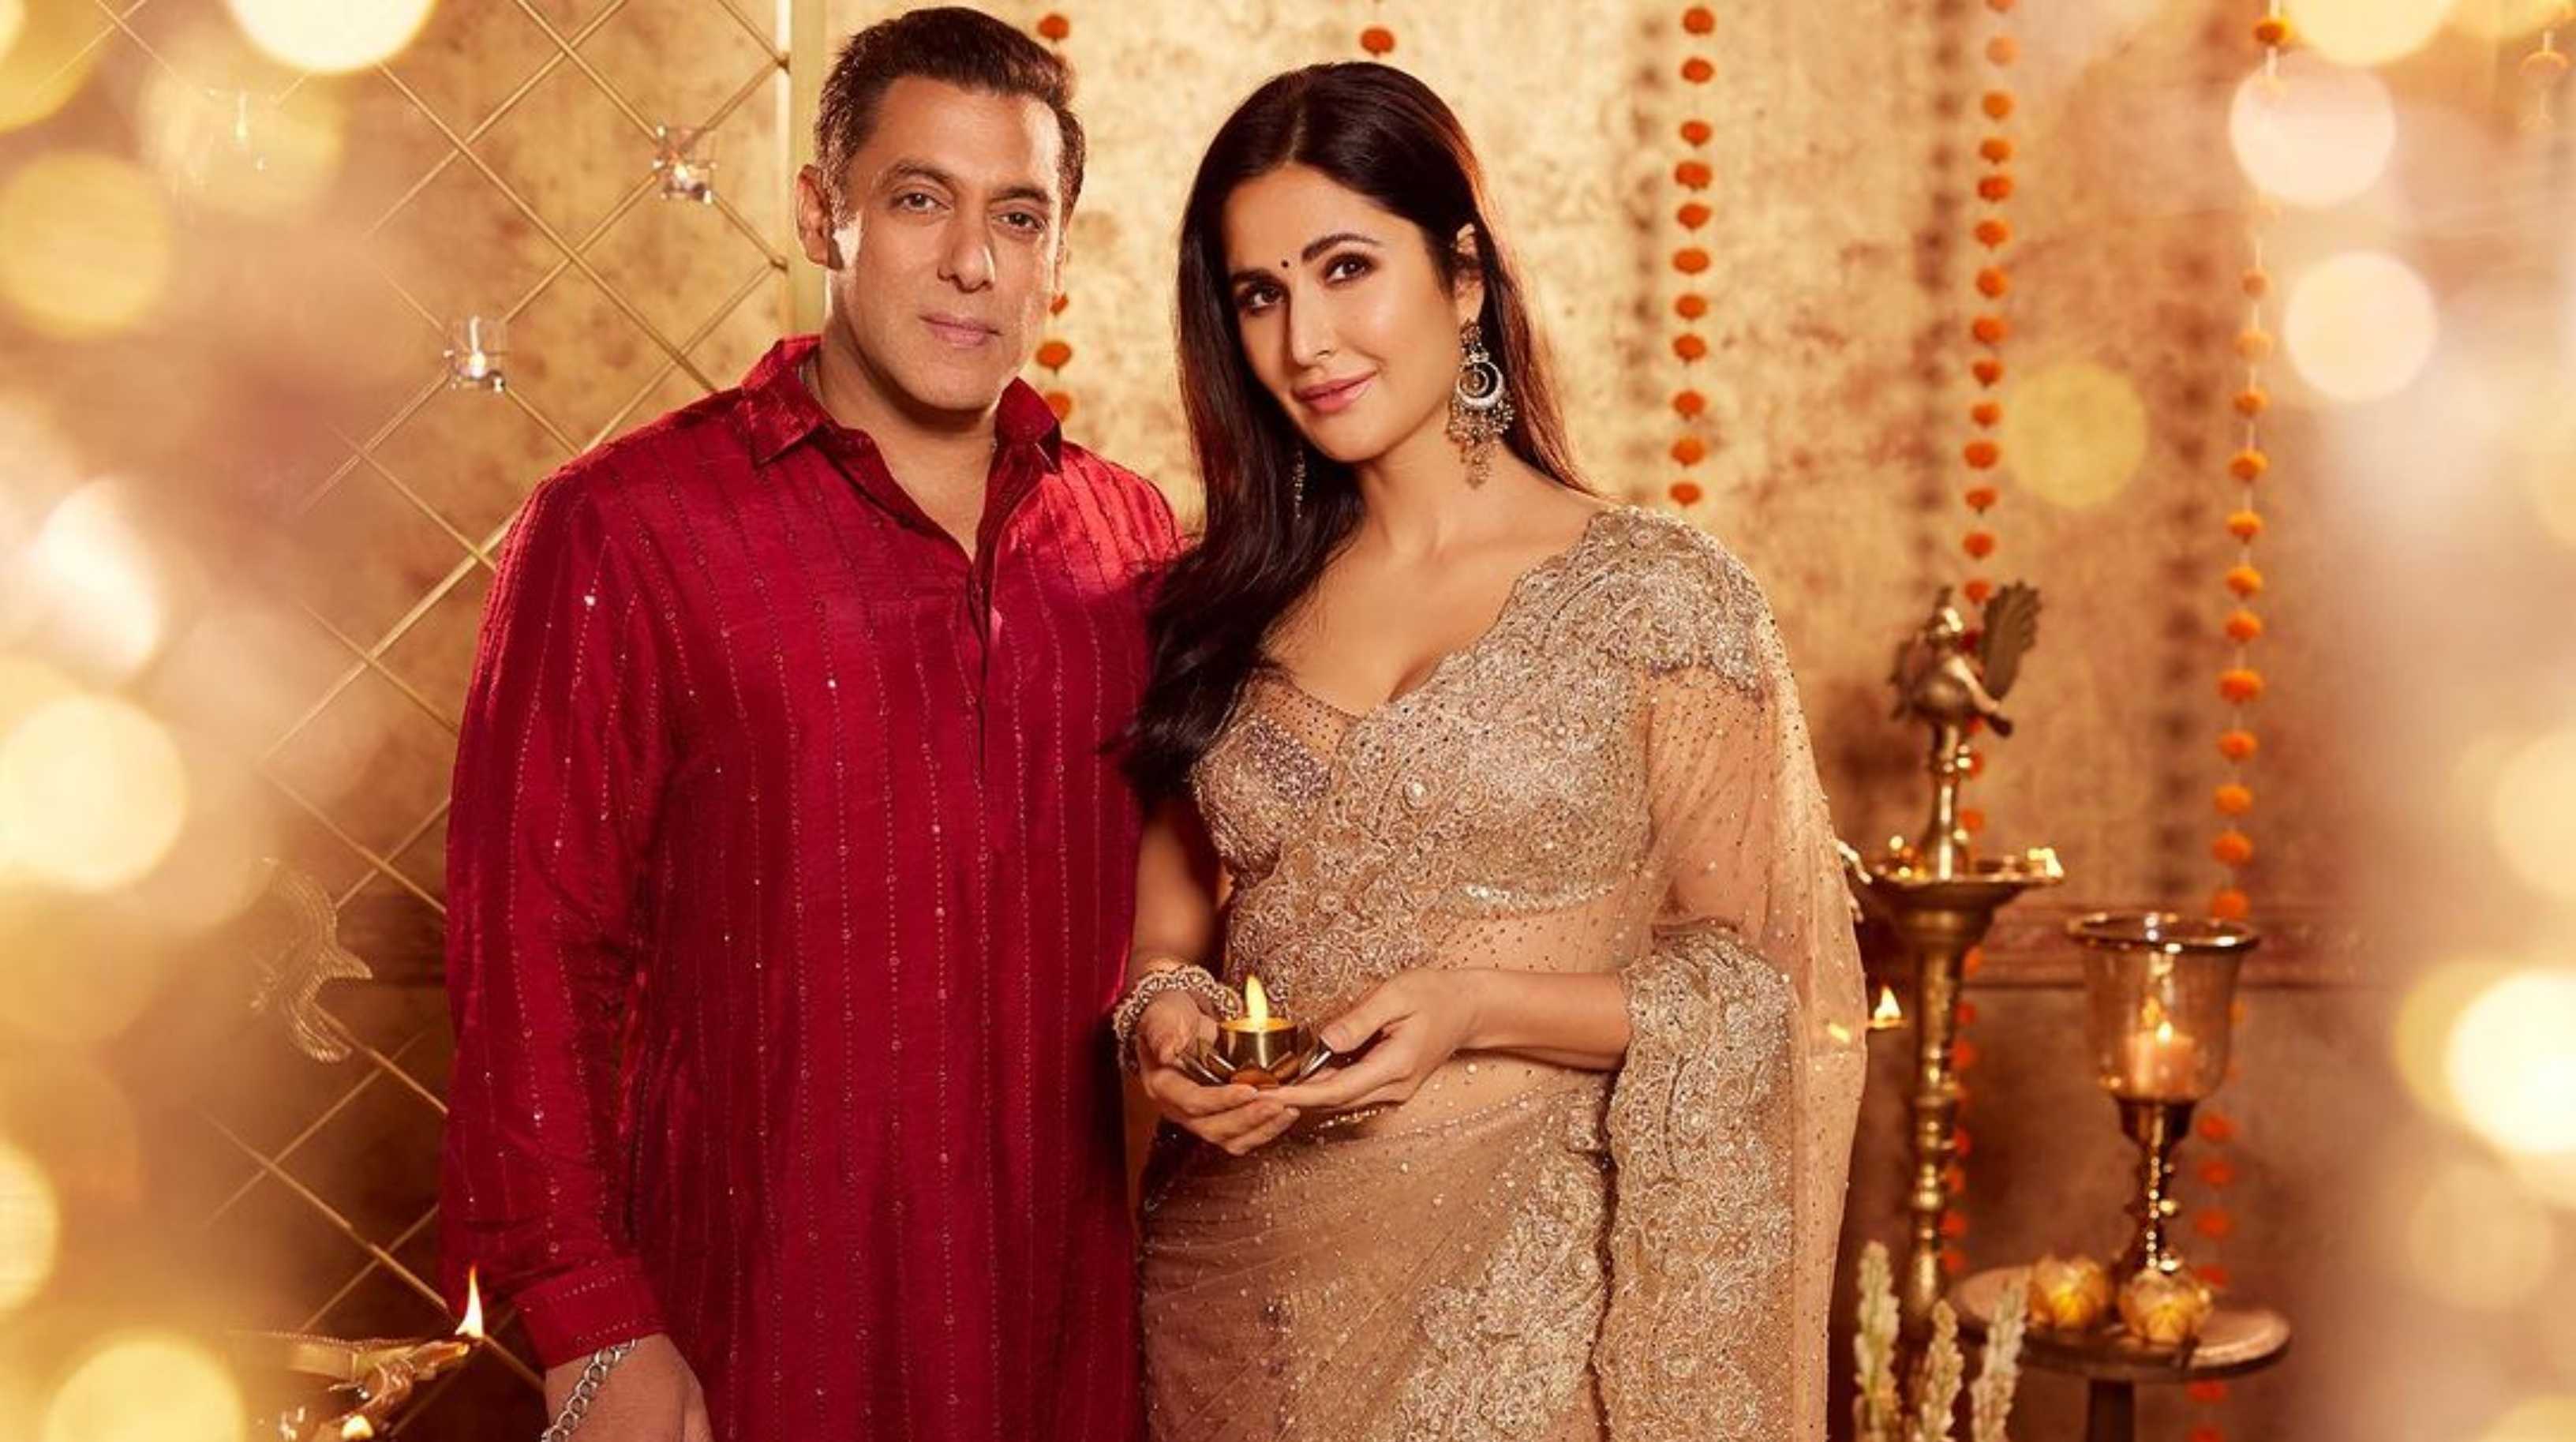 ‘How's the josh’: Salman Khan and Katrina Kaif celebrate Diwali looking perfect together; fans mention Vicky Kaushal